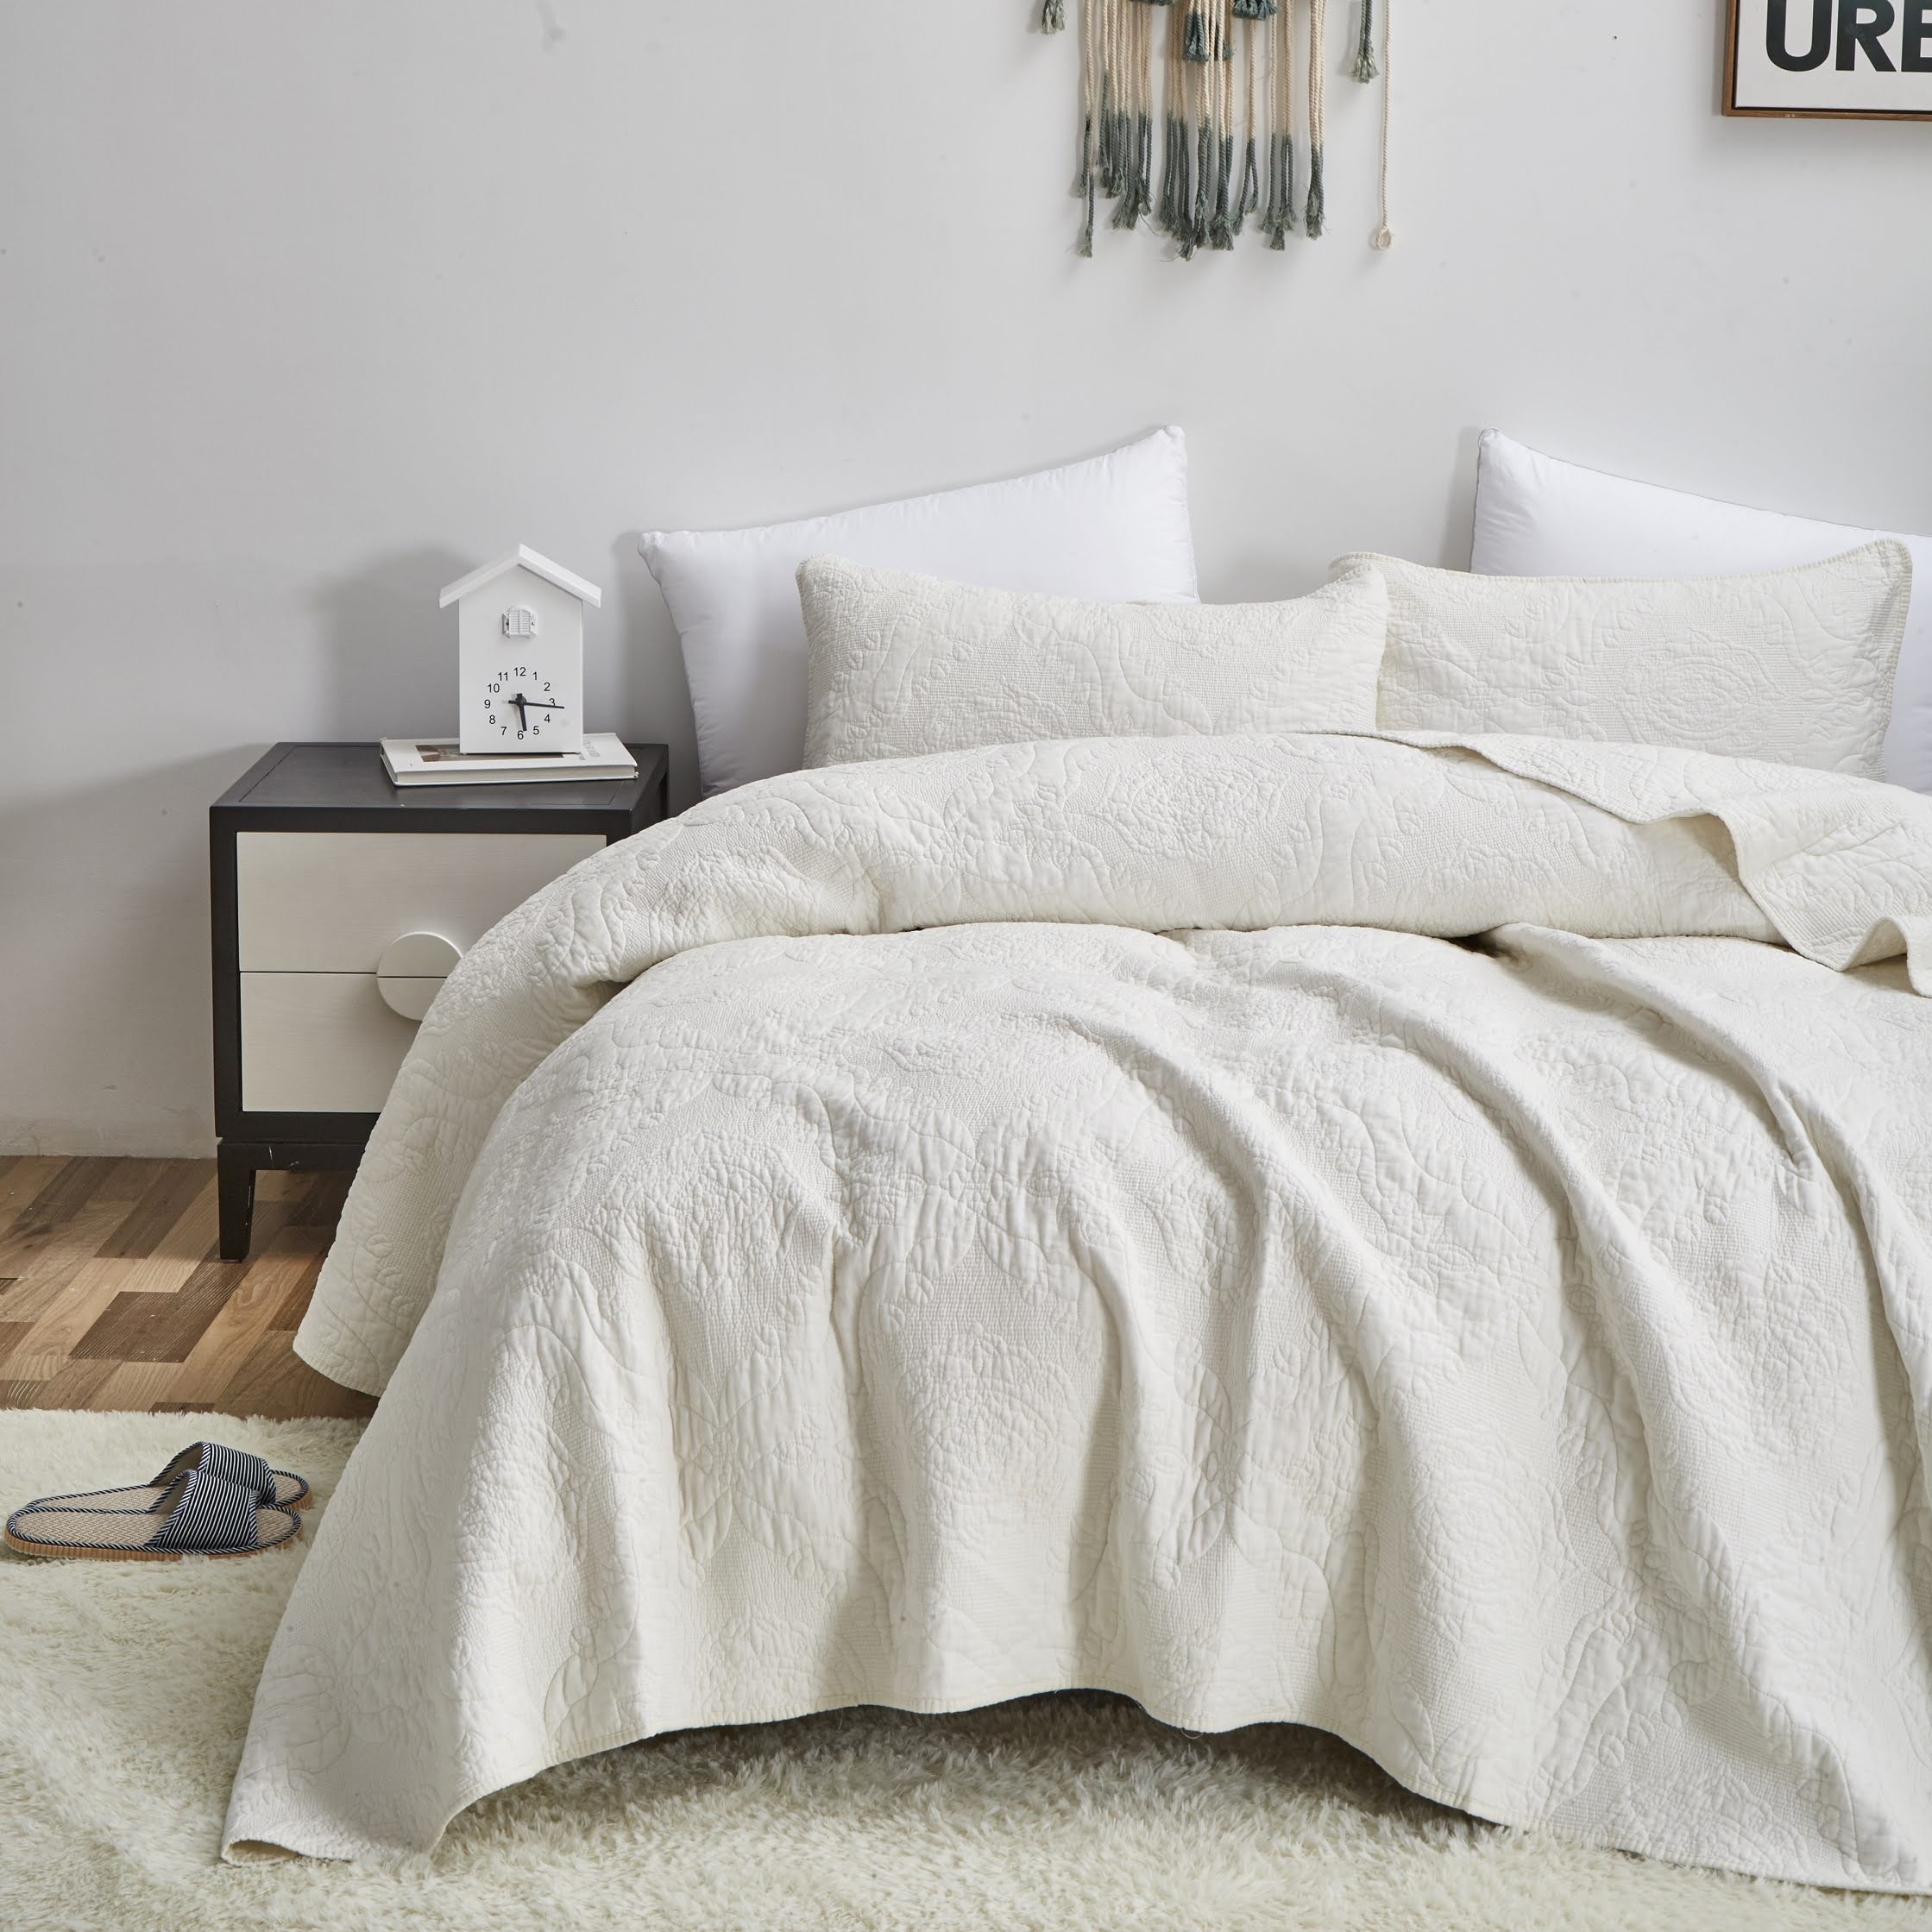 ivory white quilt and pillow shams on relaxed cozy bed. click to view all quilts and bedspreads. elegant fancy chic solid matelassé quilt bedspread blanket bedding comforter bed spread cover